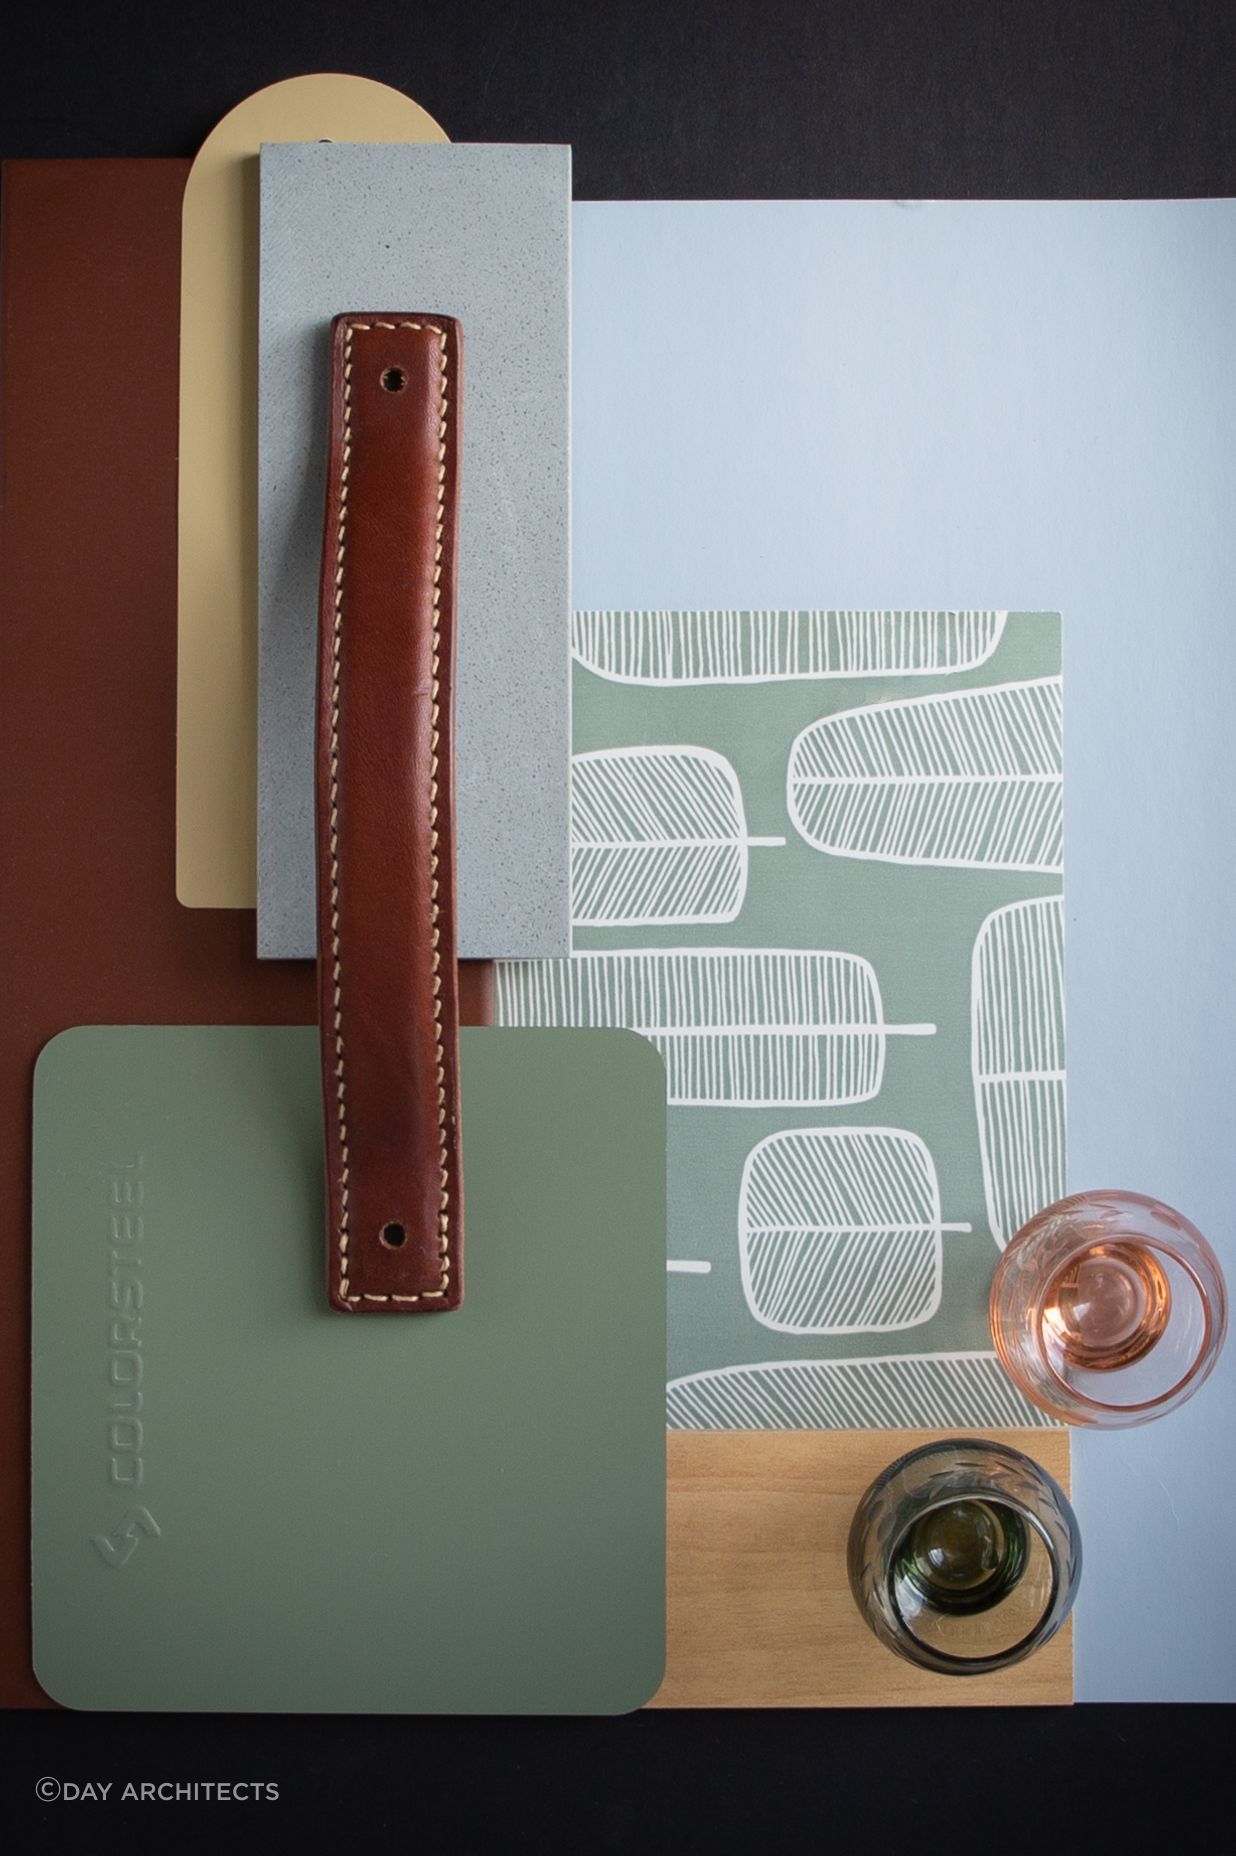 Colour: Mist Green immediately transports us to a time when pastels, terracotta and wallpaper were in their heyday. Perfect for a historical home renovation or a sweet little bach by the sea. Pour your favourite beverage and you are all set for a great weekend, this is a time worth reliving.